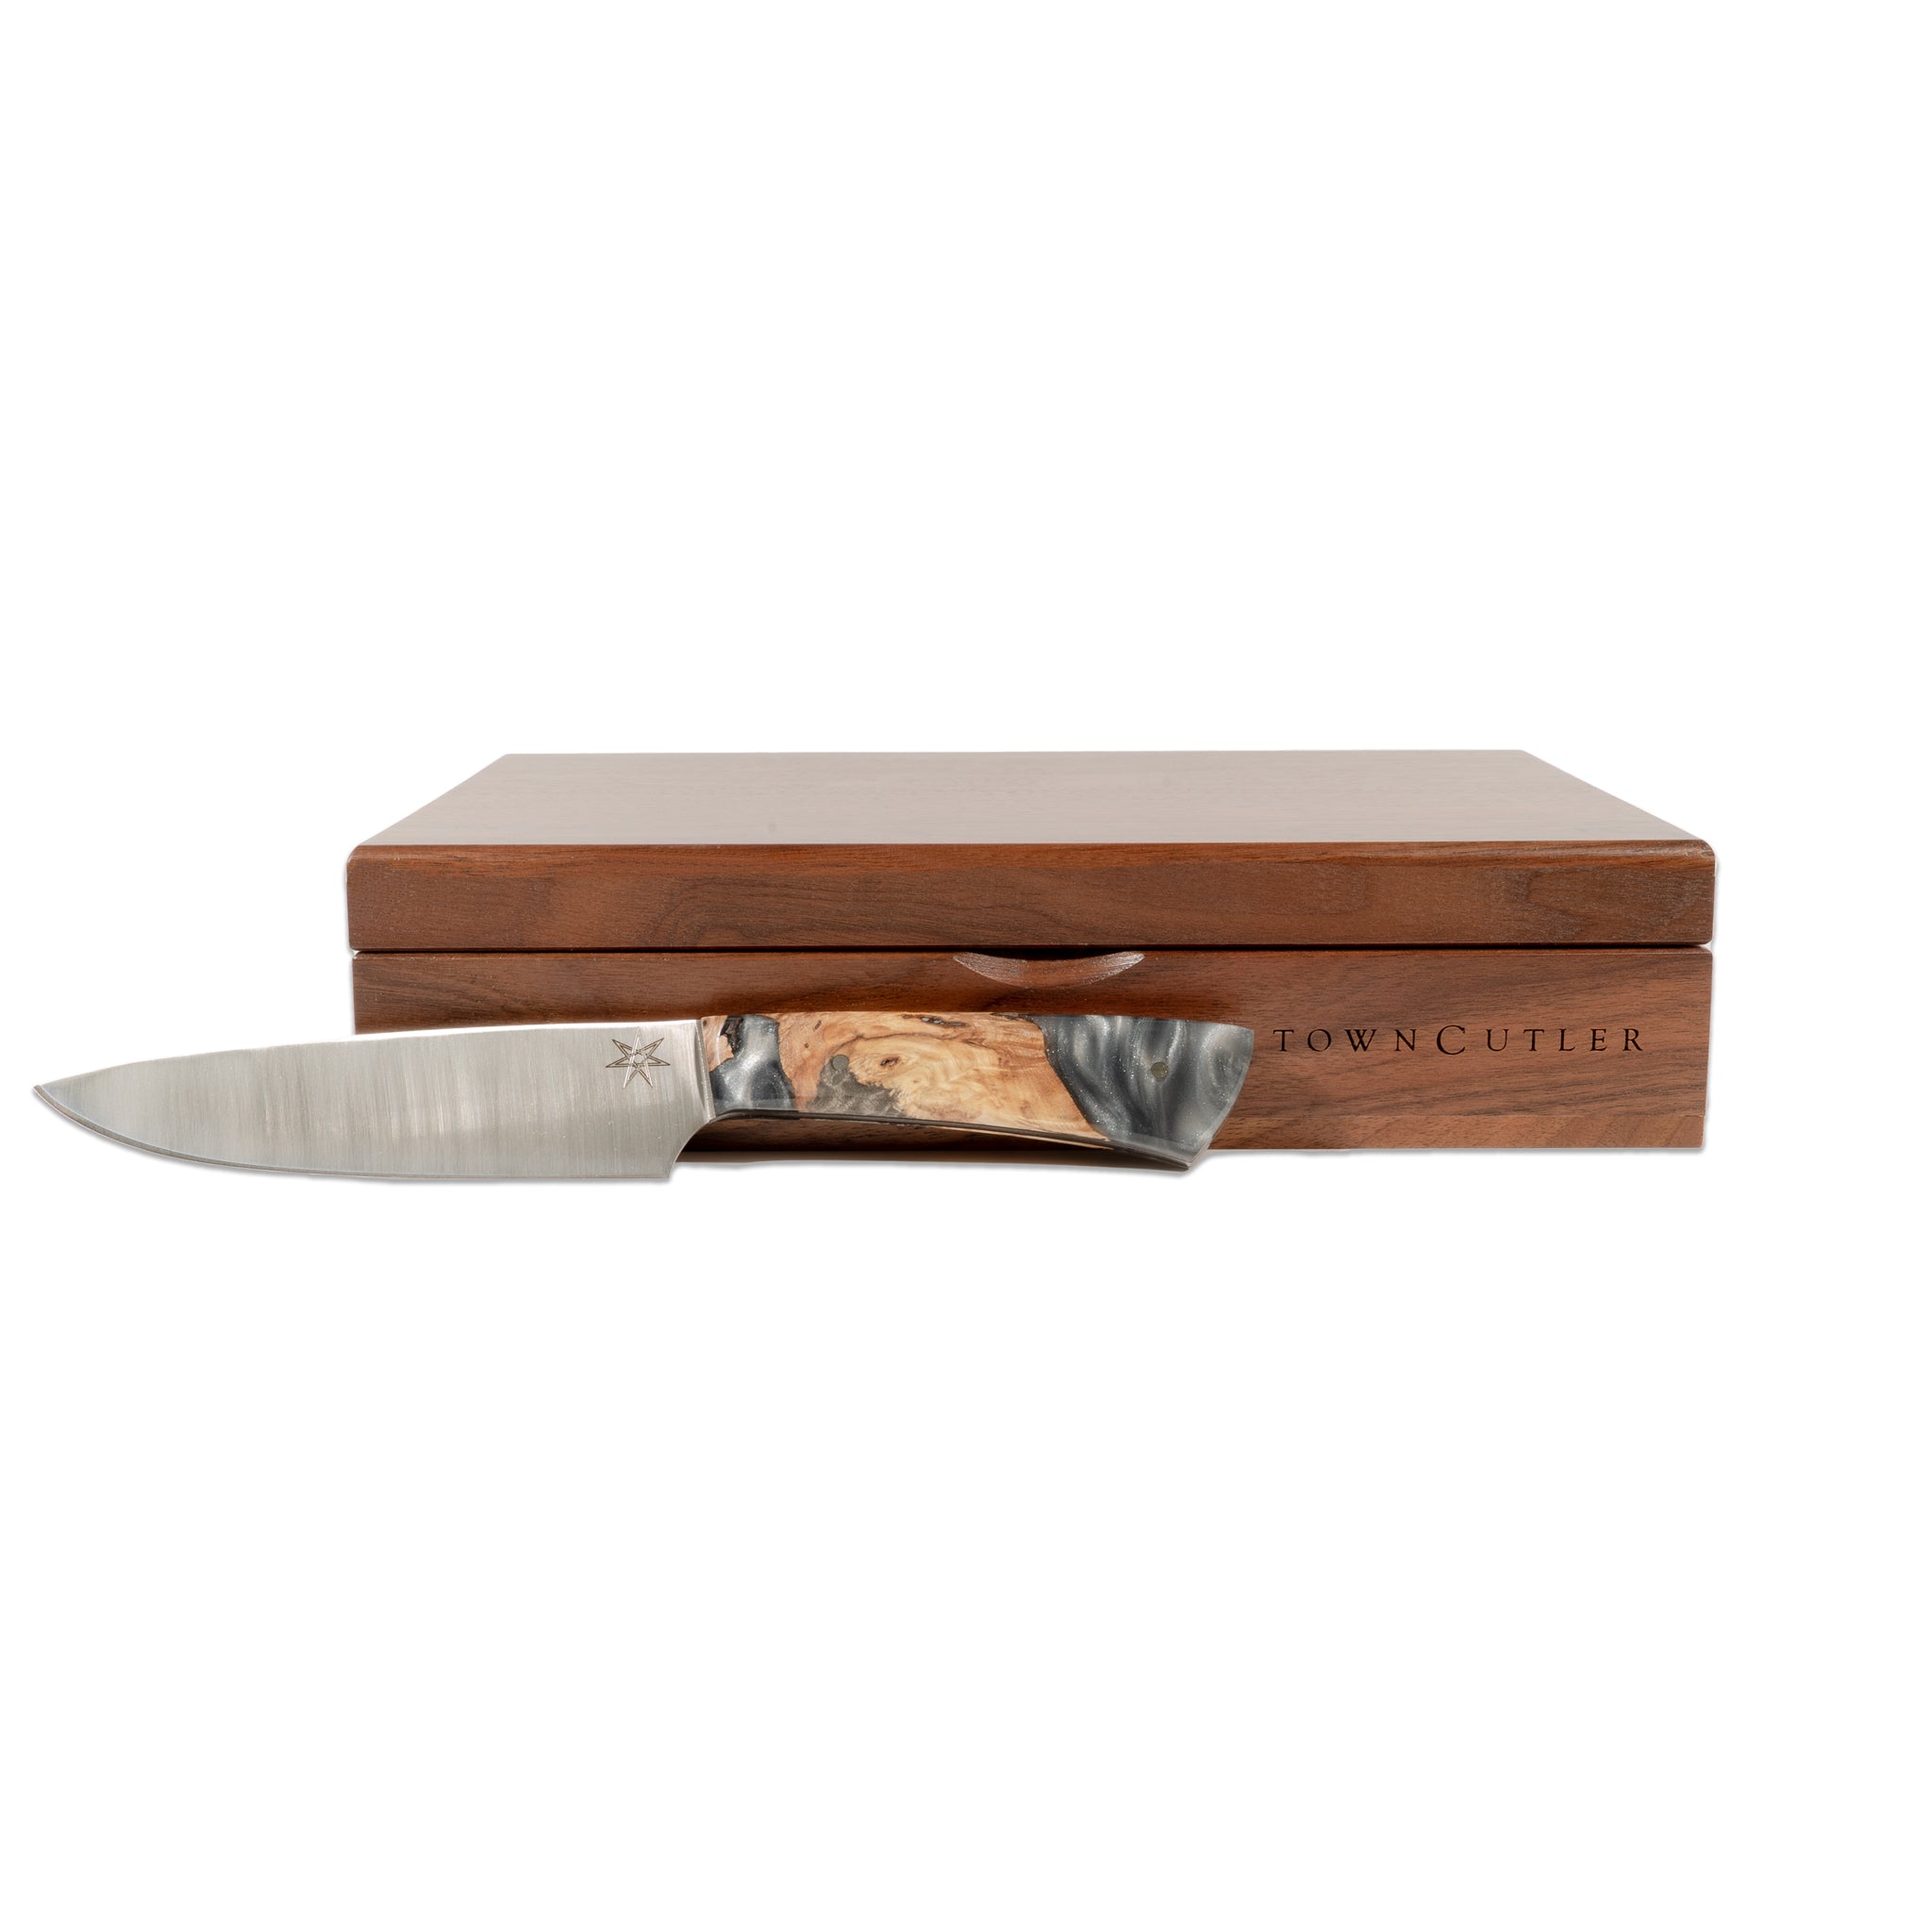 Town Cutler Ag 47 Steak Knife shown with Walnut storage box for set of four steak knives.